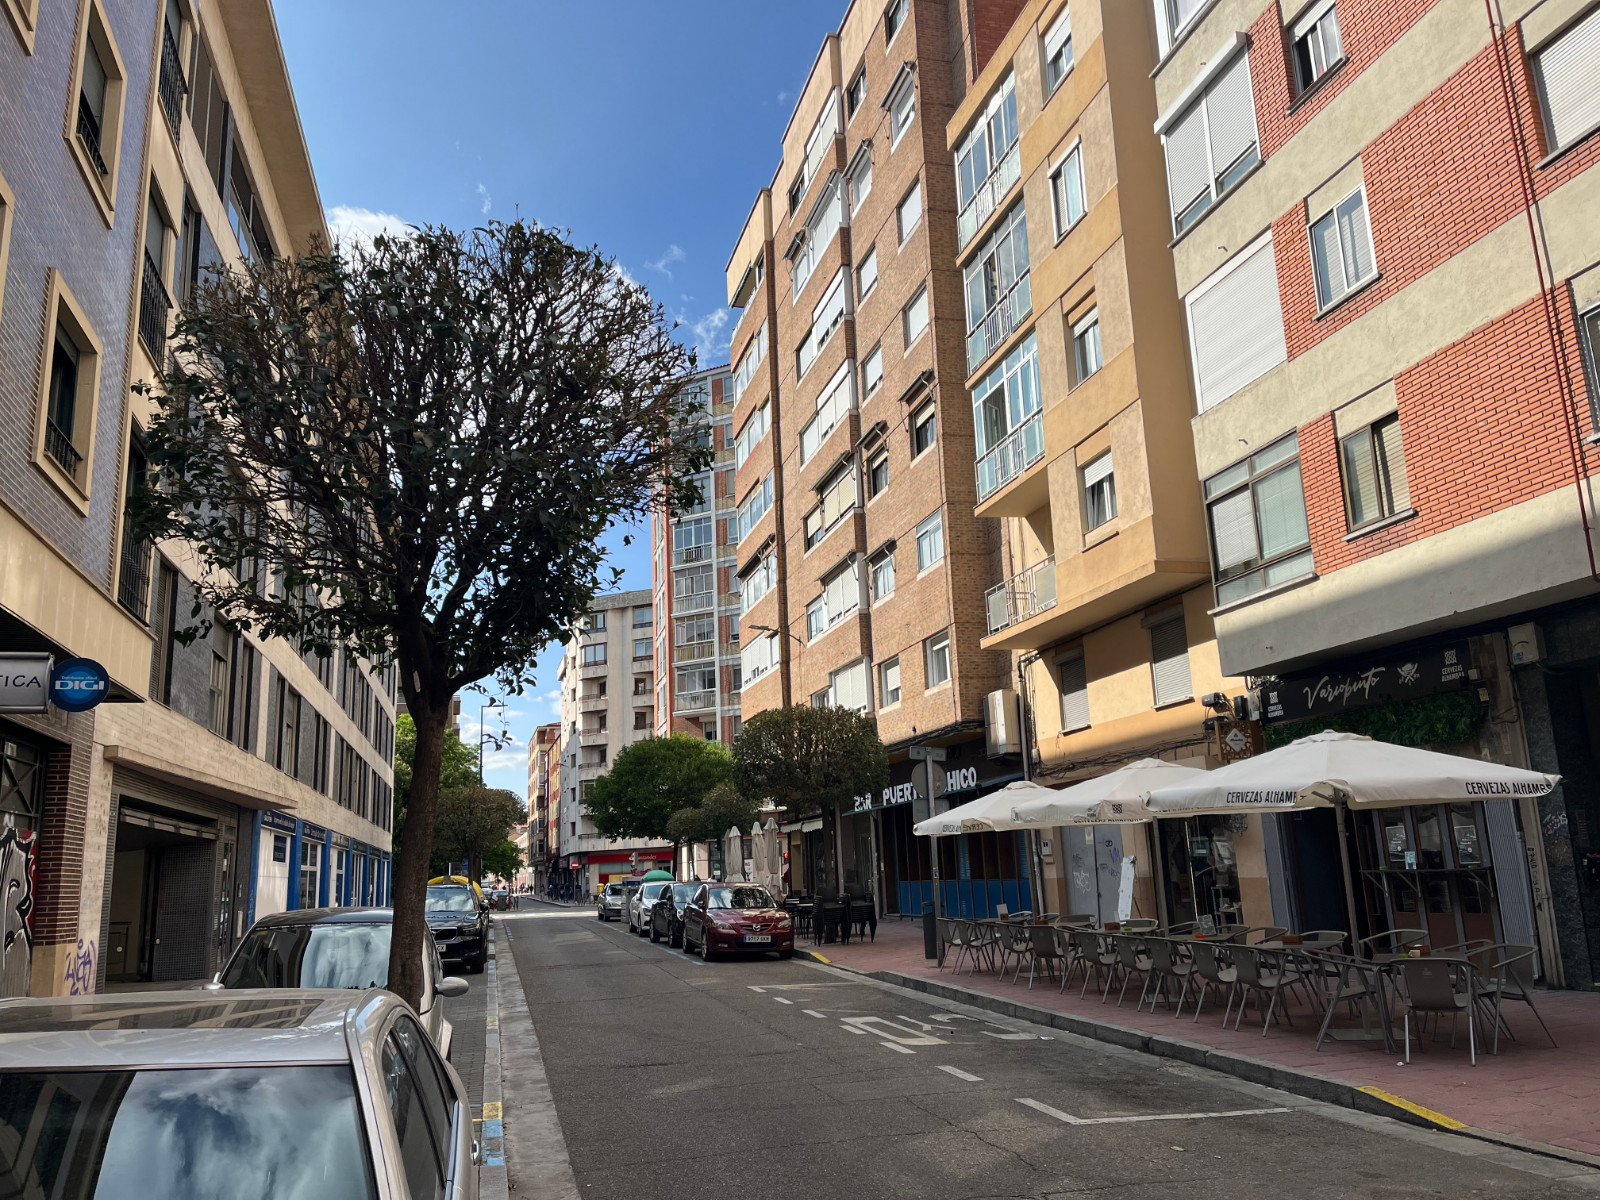 Flat for sale in San Juan, Valladolid